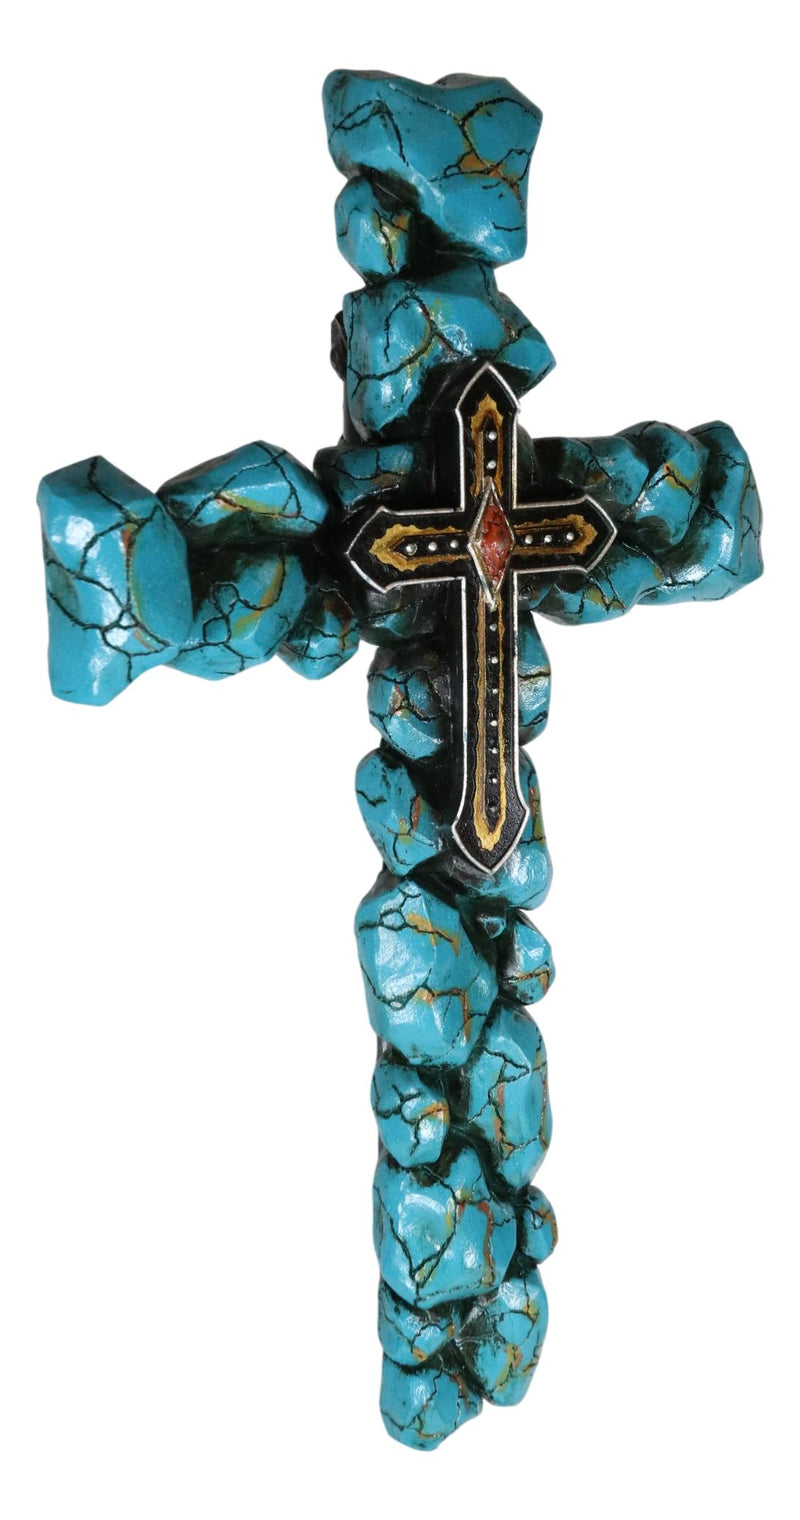 Southwest Western Crackled Turquoise Pebble Rock Beads Layered Wall Cross Decor